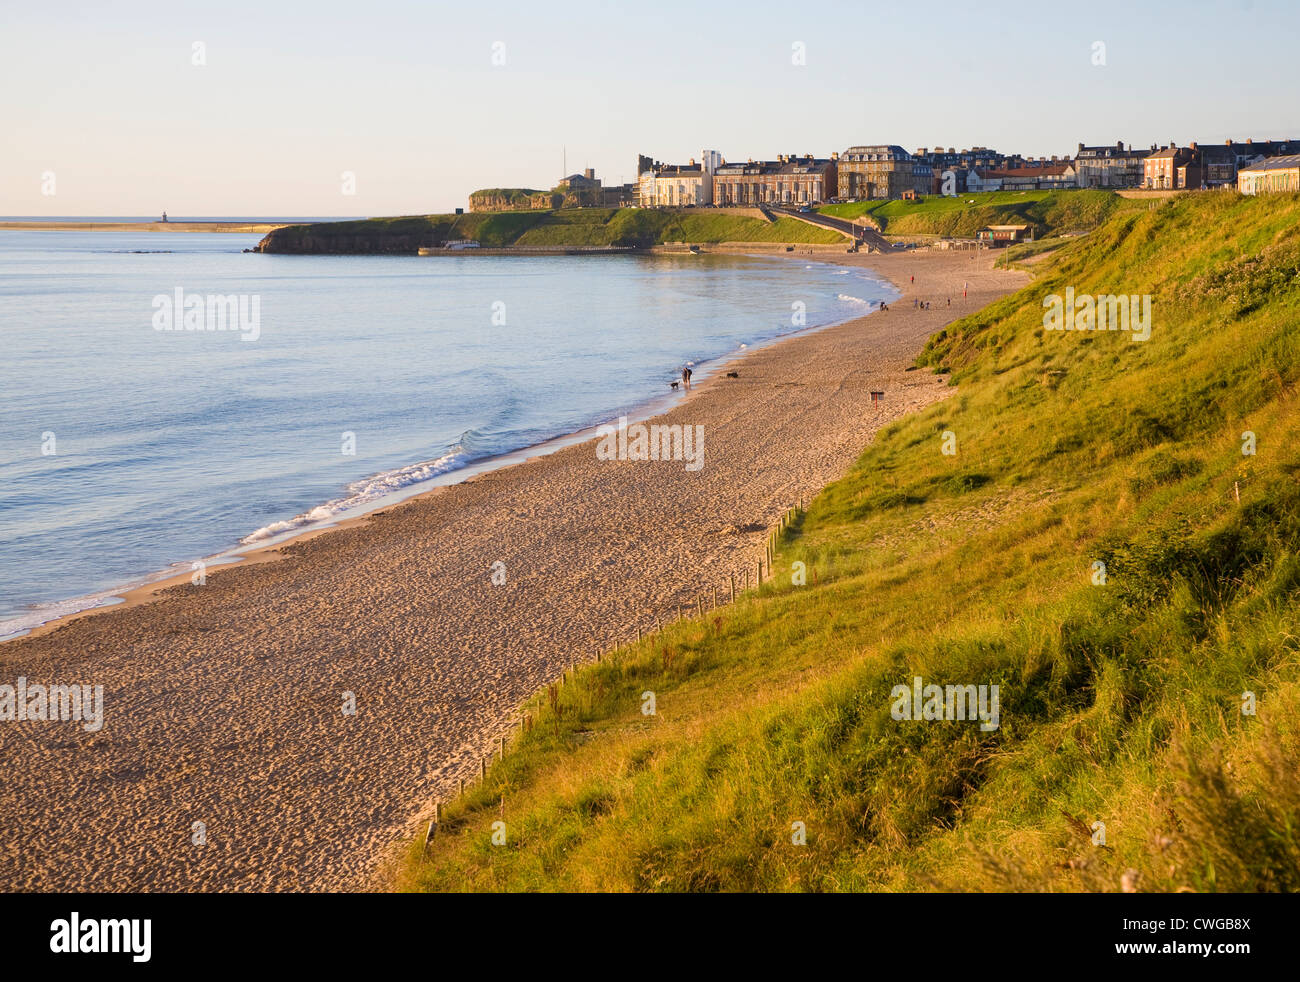 Longsands beach Tynemouth from Cullercoats, Northumberland, England Stock Photo